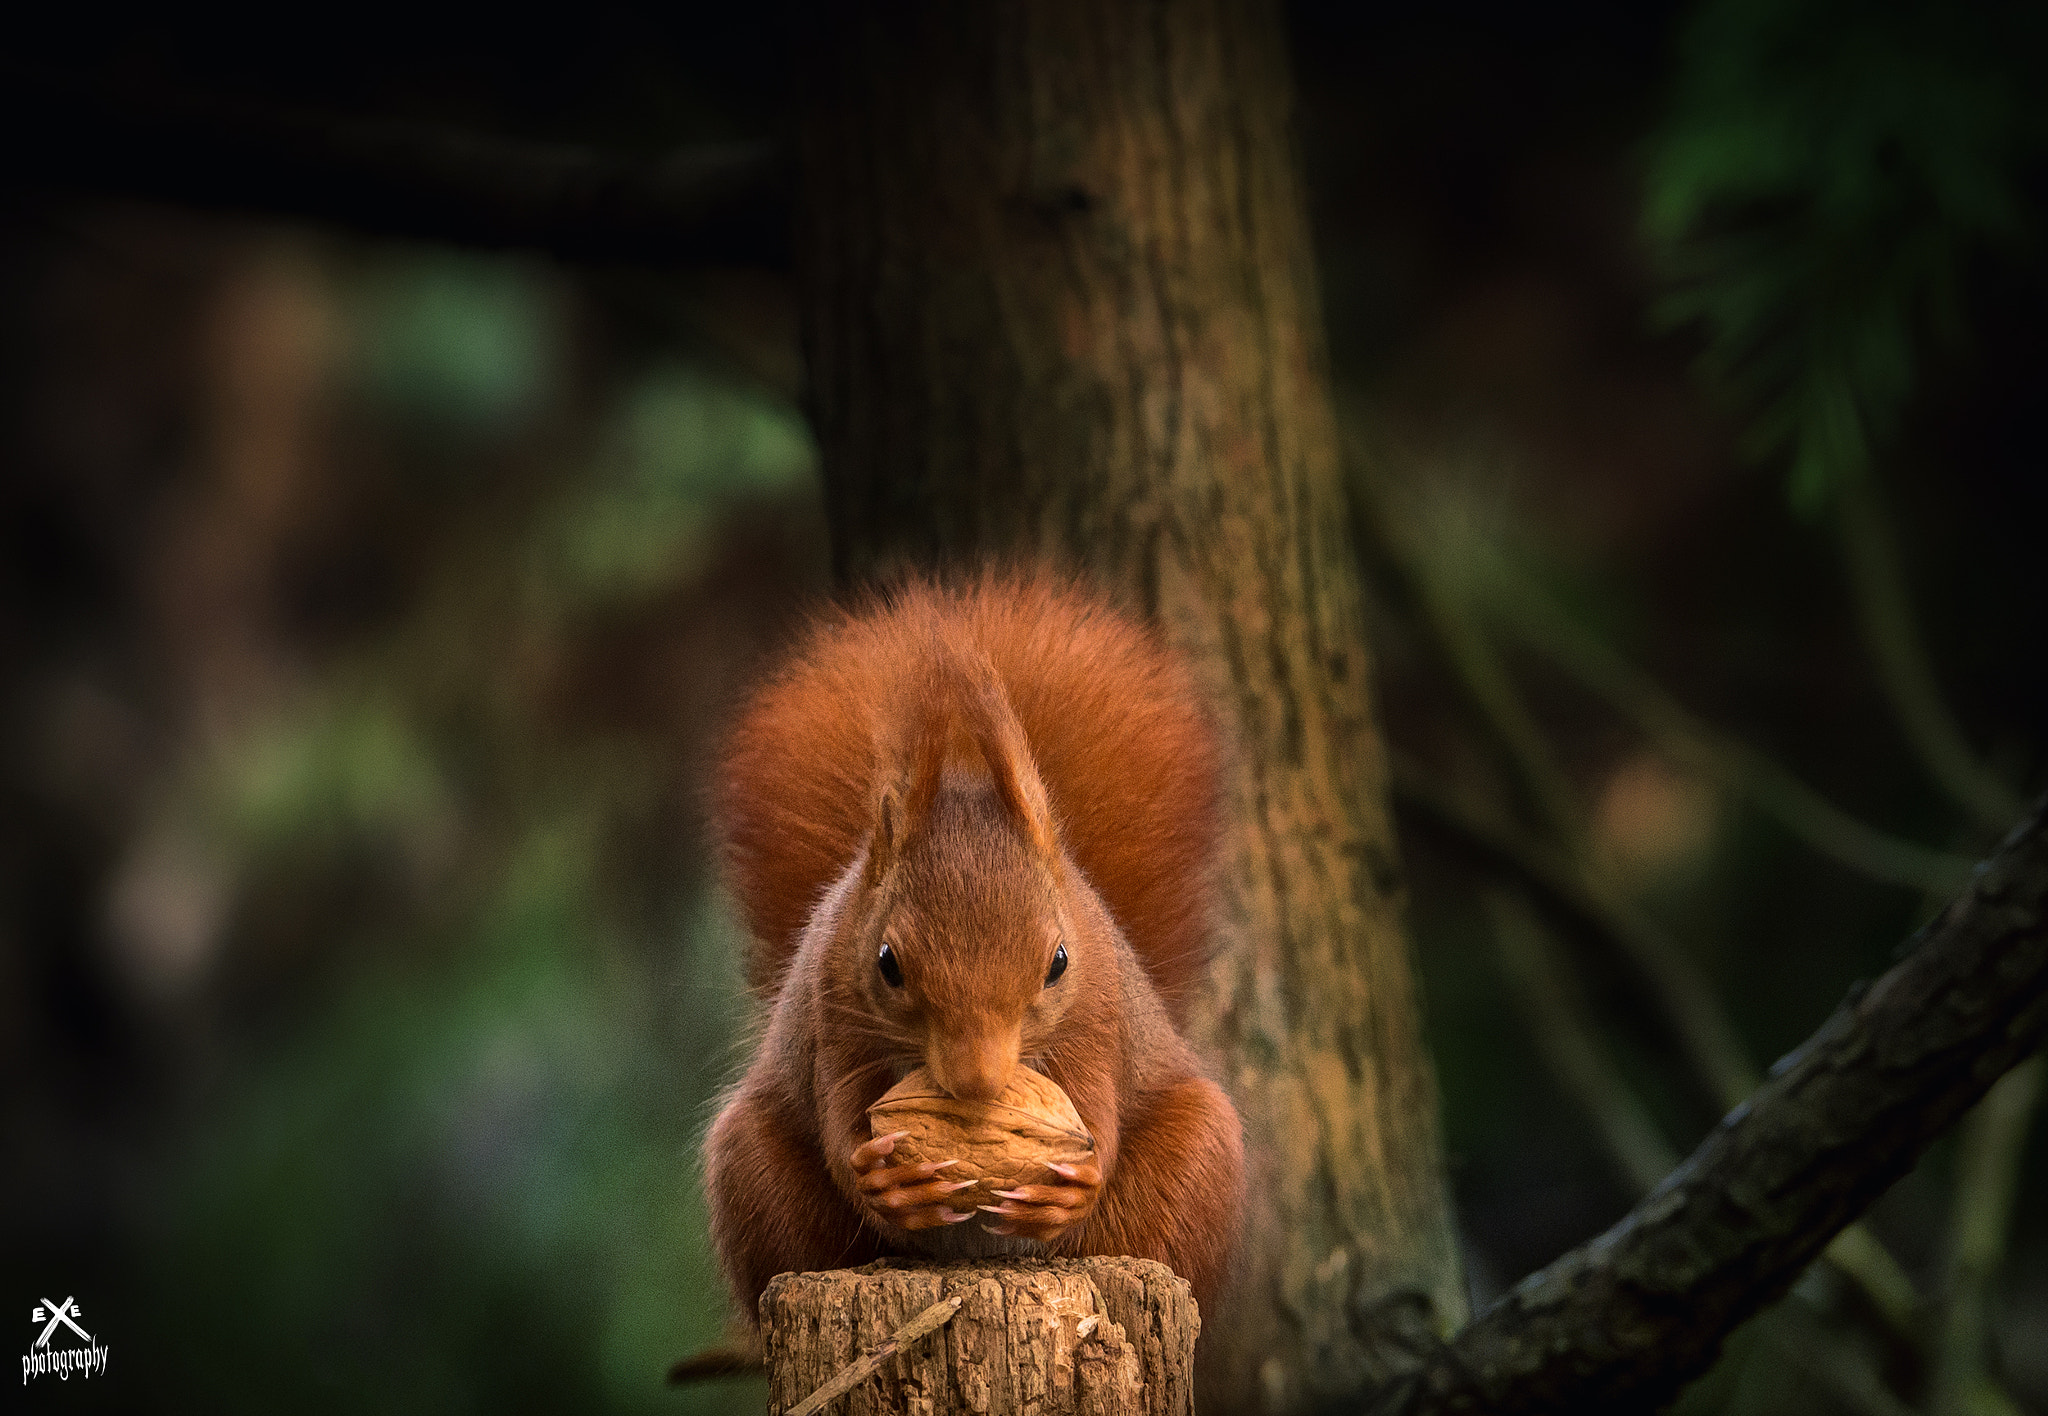 Nikon D610 + Sigma 150-600mm F5-6.3 DG OS HSM | C sample photo. Red squirrel photography